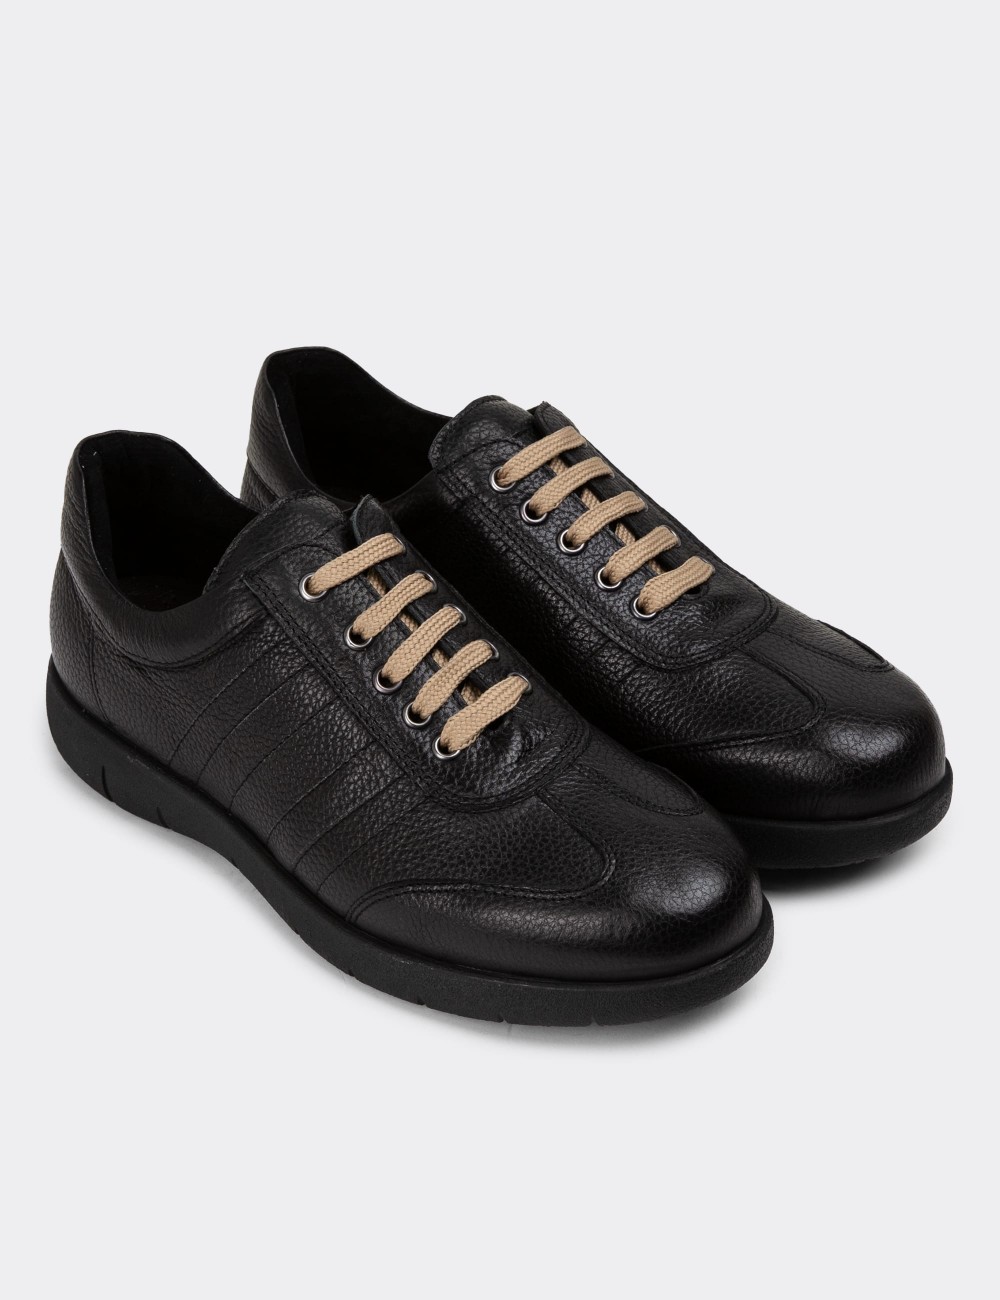 Black Leather Lace-up Shoes - 01950MSYHC01